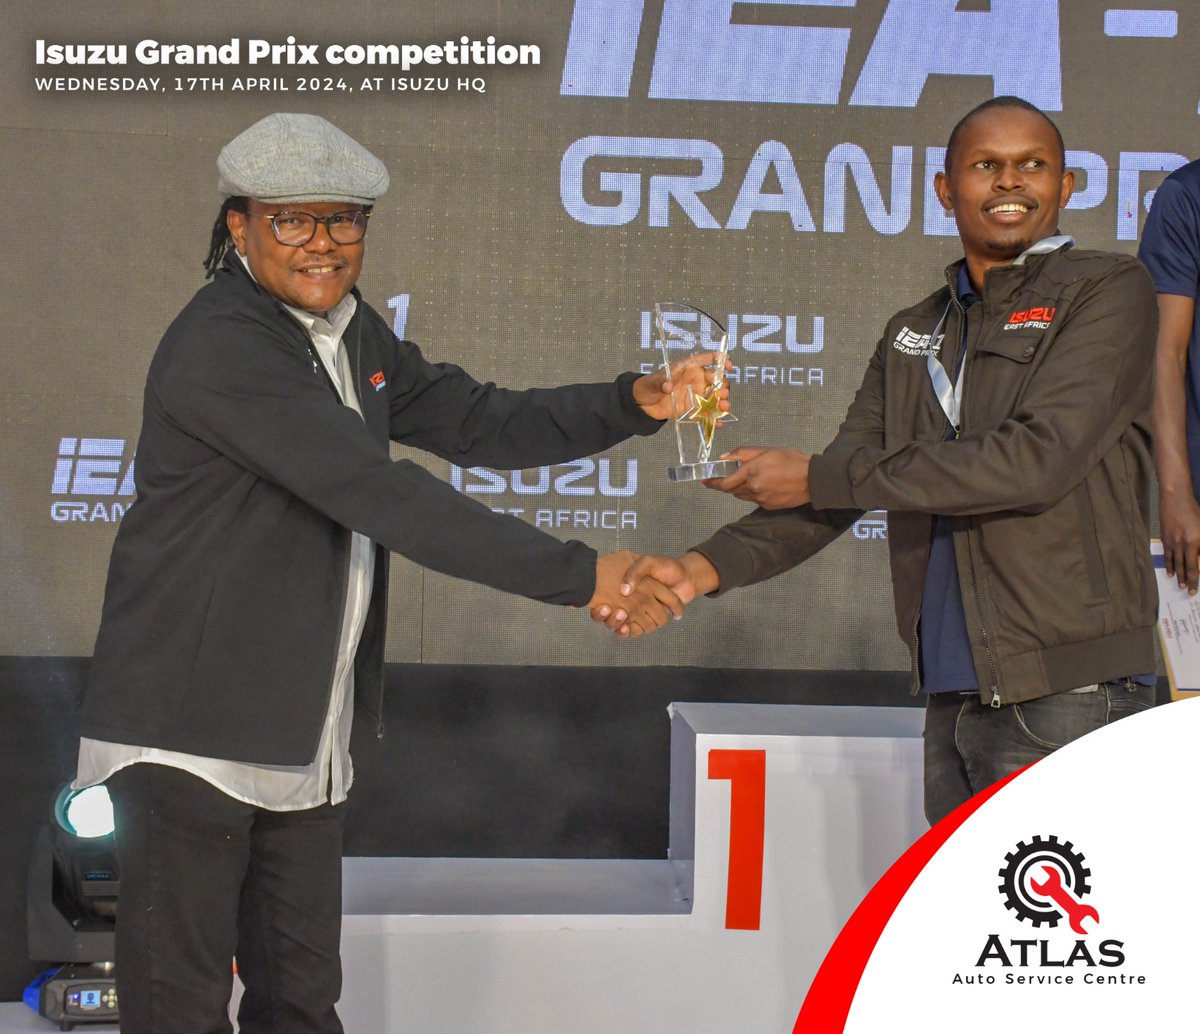 Congratulations to Antony for bringing home the gold at the Isuzu Grand Prix competition held at Isuzu Headquarters!🏆✨ Your dedication and expertise shine bright, setting the standard for excellence in our industry. #IsuzuGrandPrix #TeamAtlas #TeachersDay  #GenZ #nairobifloods